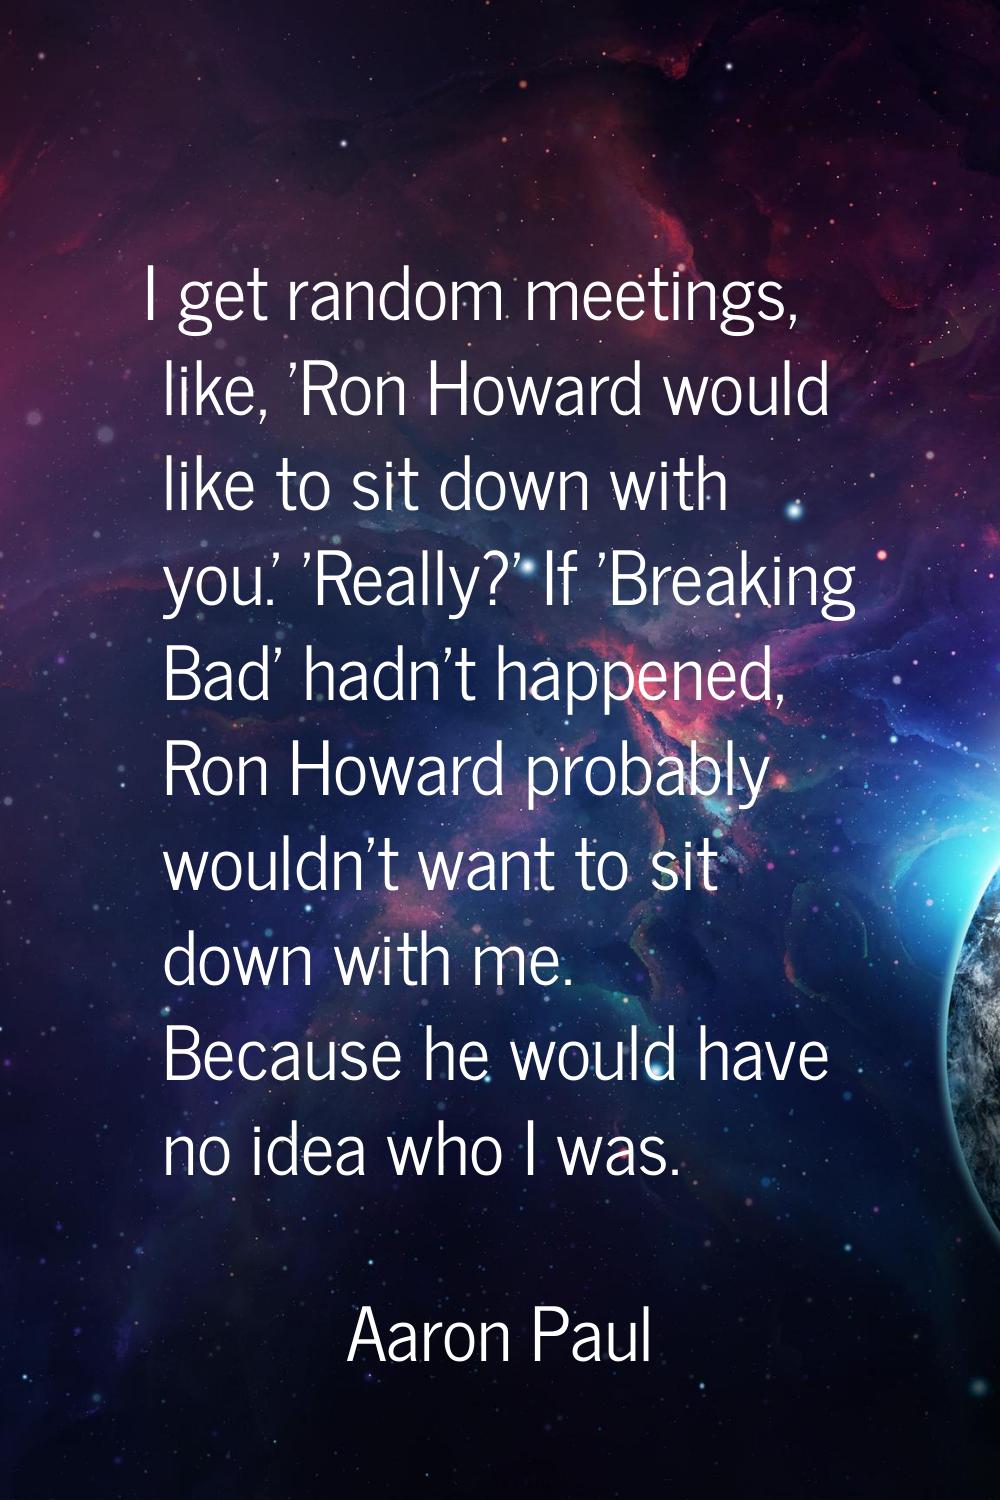 I get random meetings, like, 'Ron Howard would like to sit down with you.' 'Really?' If 'Breaking B